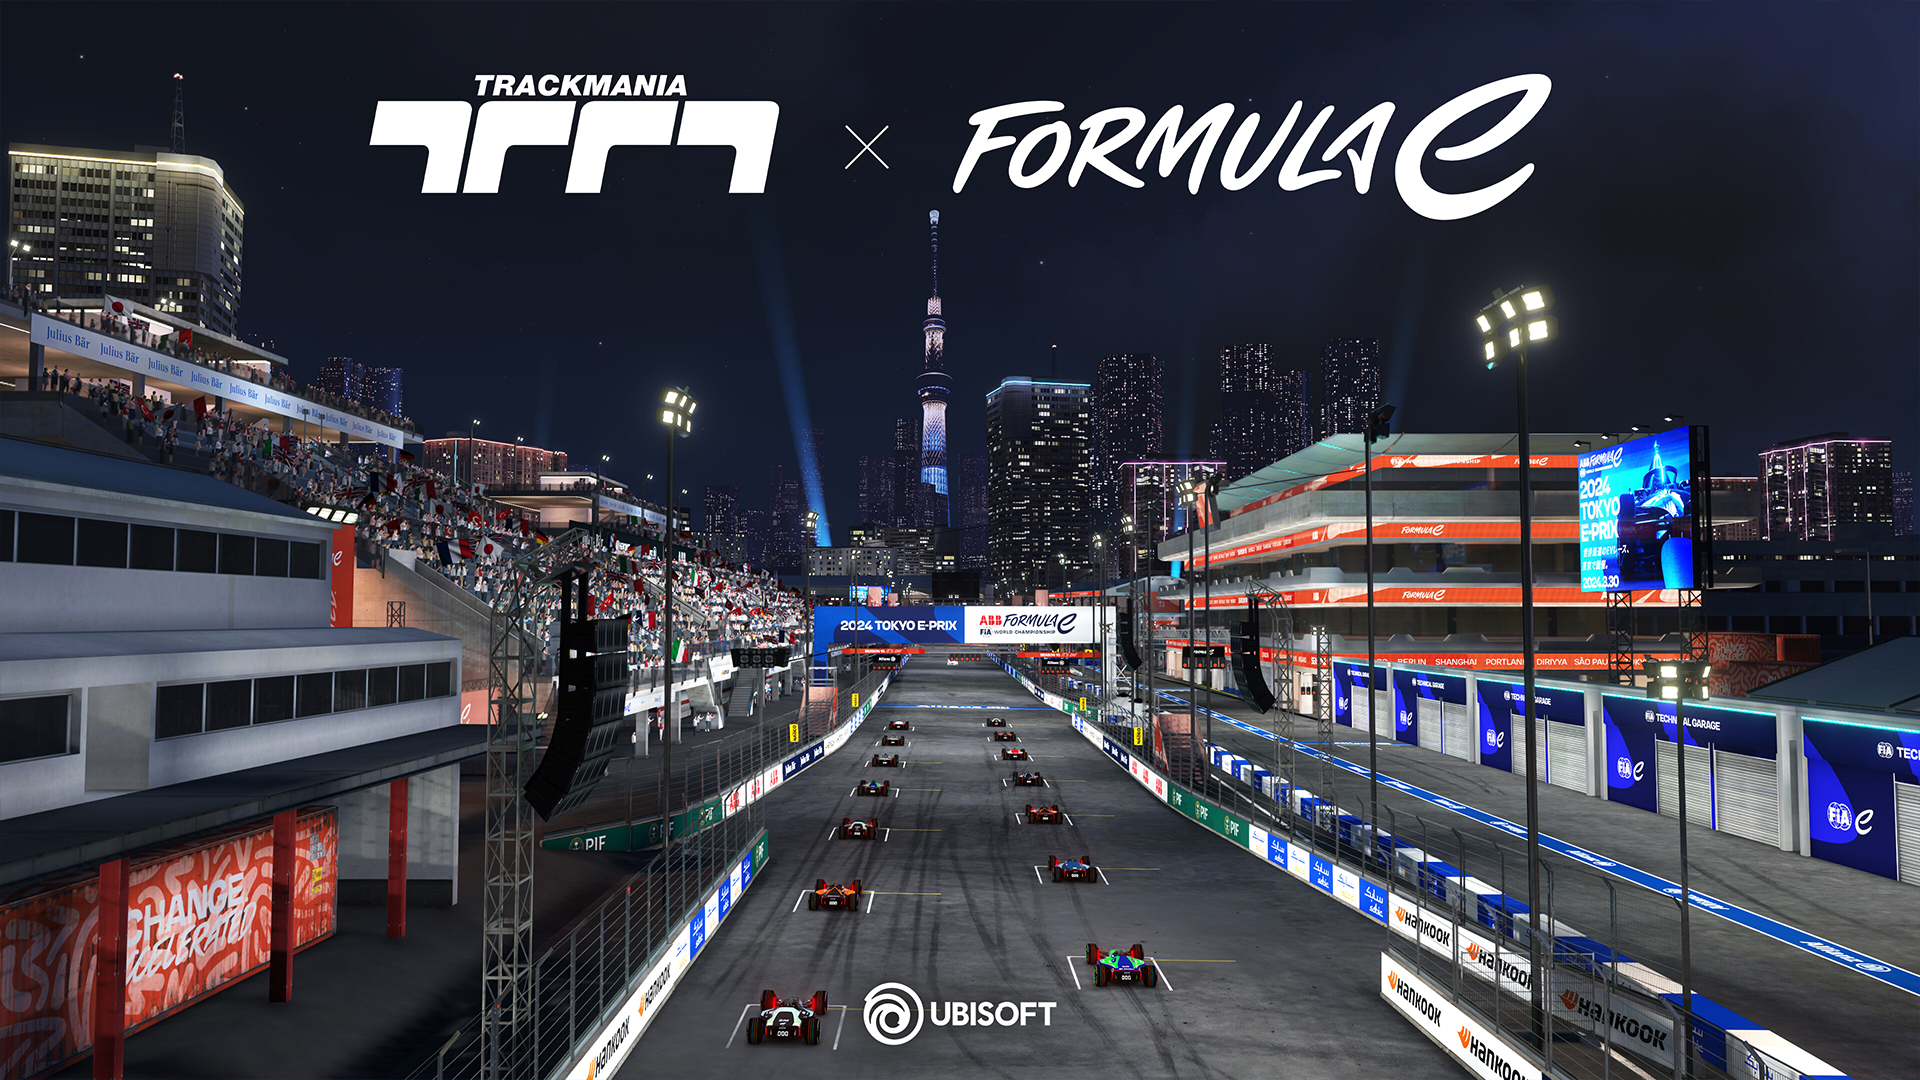 Trackmania skins for a collaboration between Ubisoft and the ABB FIA Formula E World Championship championship